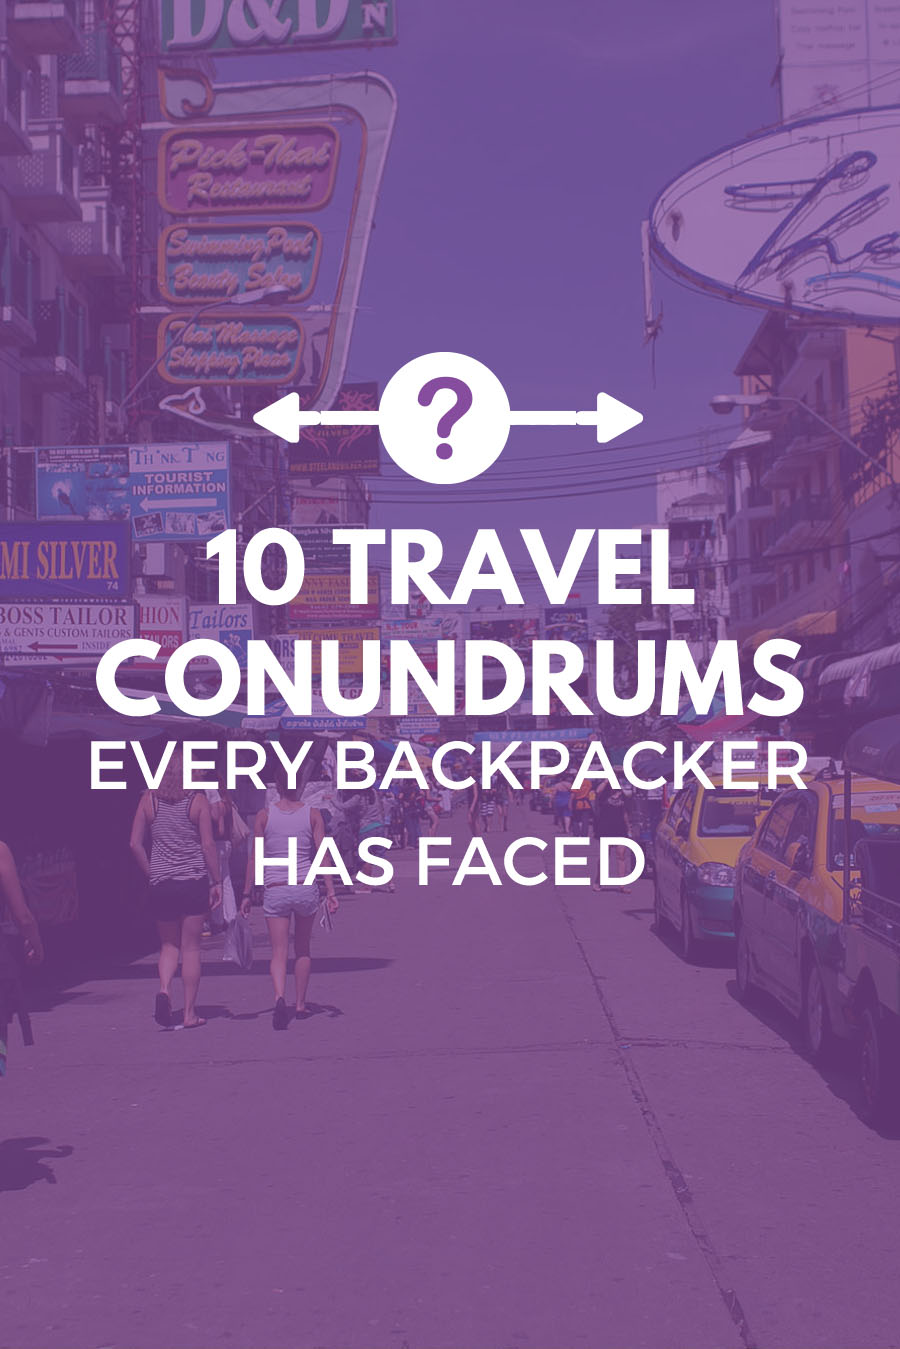 Ten Travel Conundrums Every Backpacker Has Faced